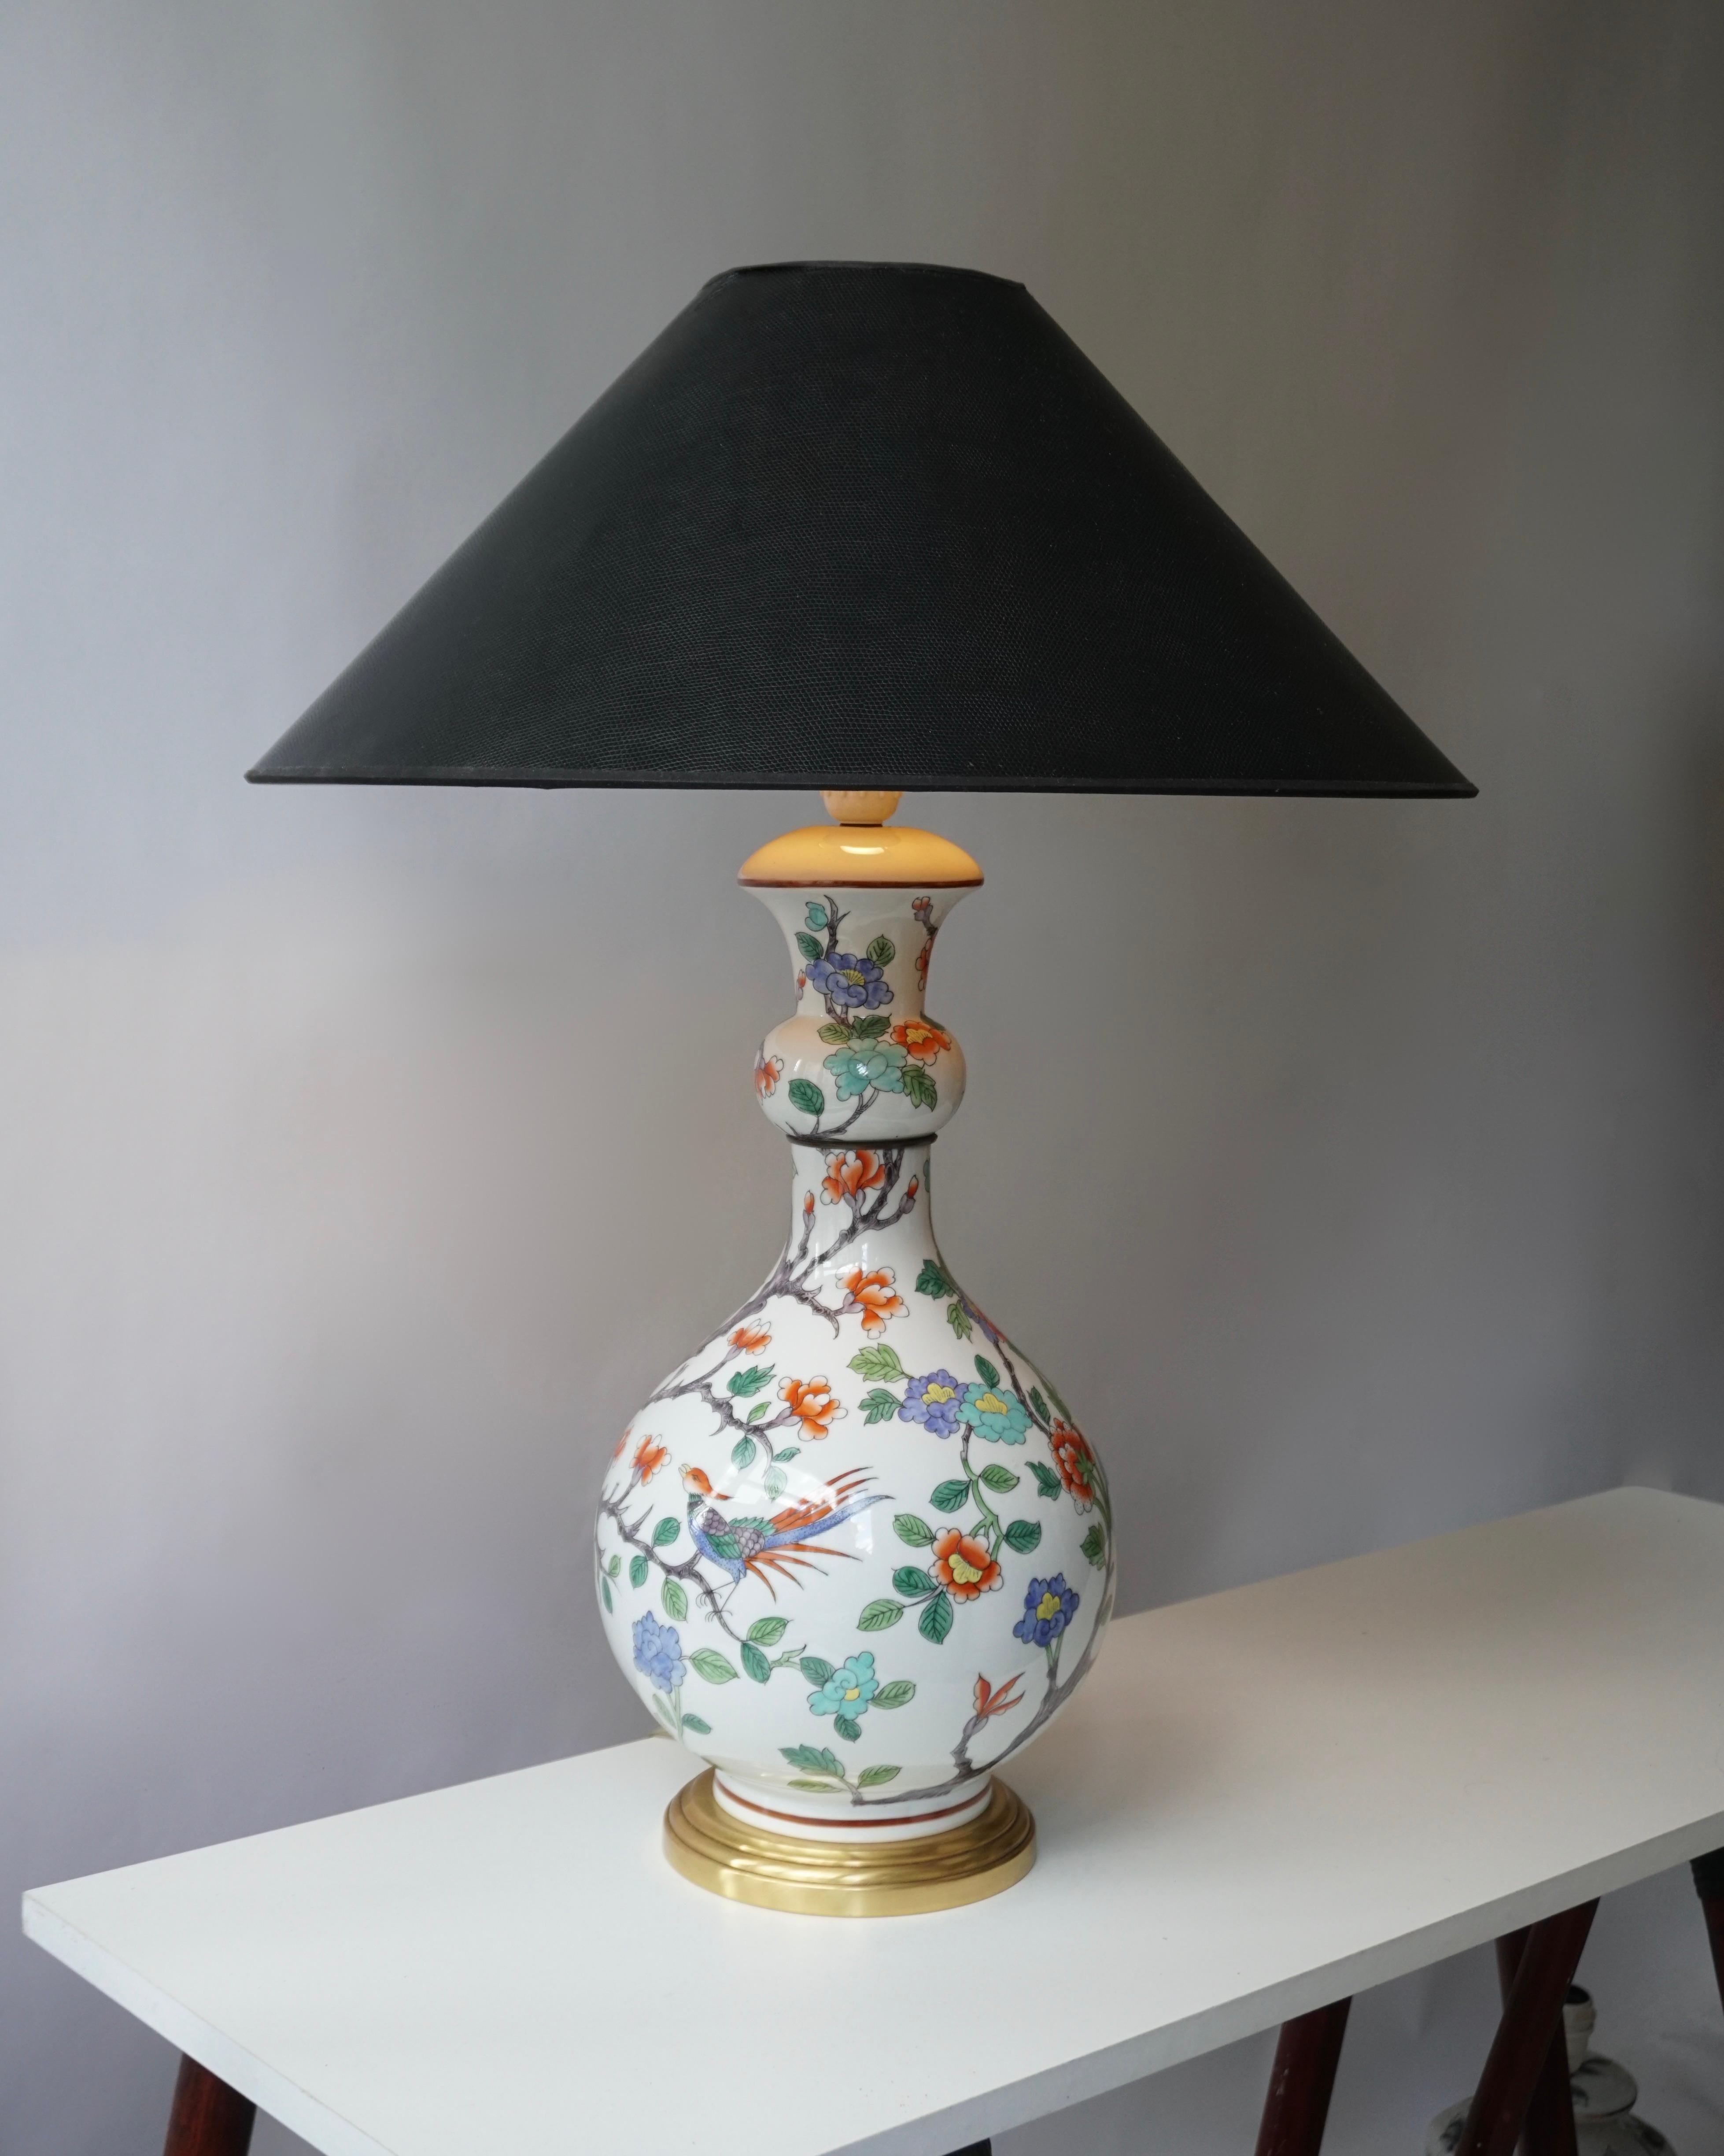 Table lamp in porcelain decorated with colorful flowers and a bird.
Underside with under-glaze blue stamp 'Porcelaine de Paris, France, fondee en 1773'.

Shade shown are for demonstration purposes only.
Height with shade 73 cm.
Diameter 50 cm.